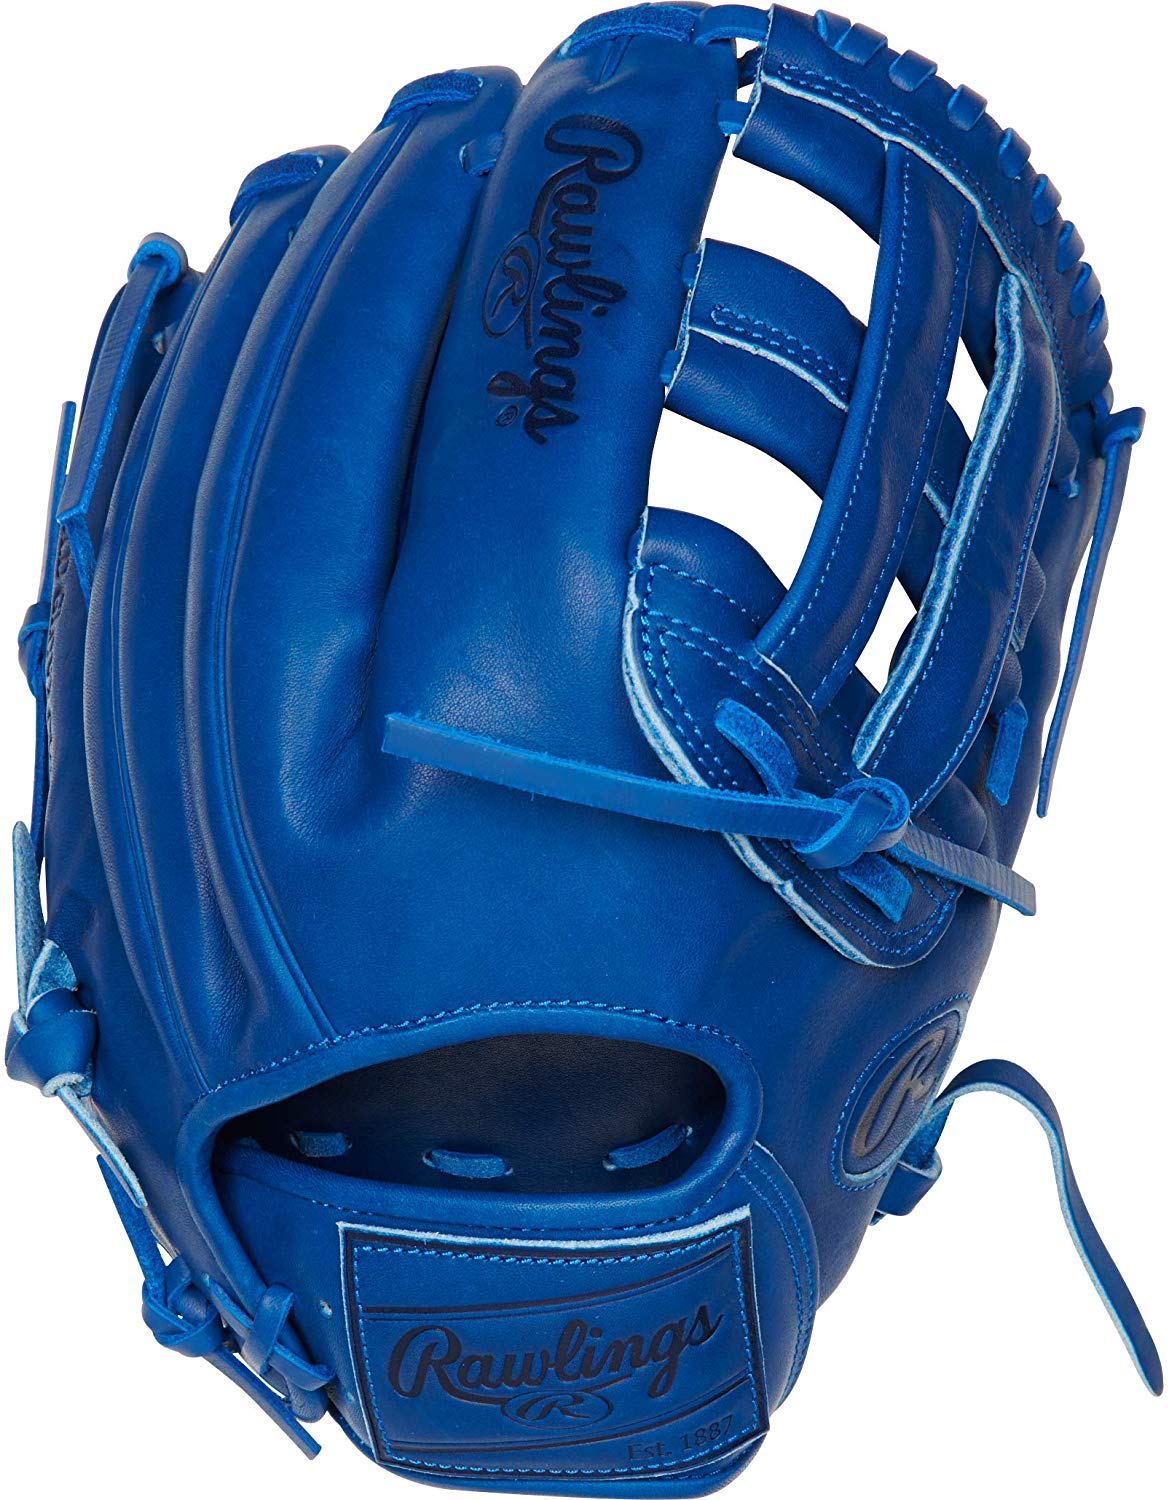 rawlings-pro-label-royal-heart-of-hide-baseball-glove-12-25-right-hand-throw PROKB17-6R-RightHandThrow Rawlings 083321691416 The Rawlings limited edition Heart of the Hide Pro Label 5